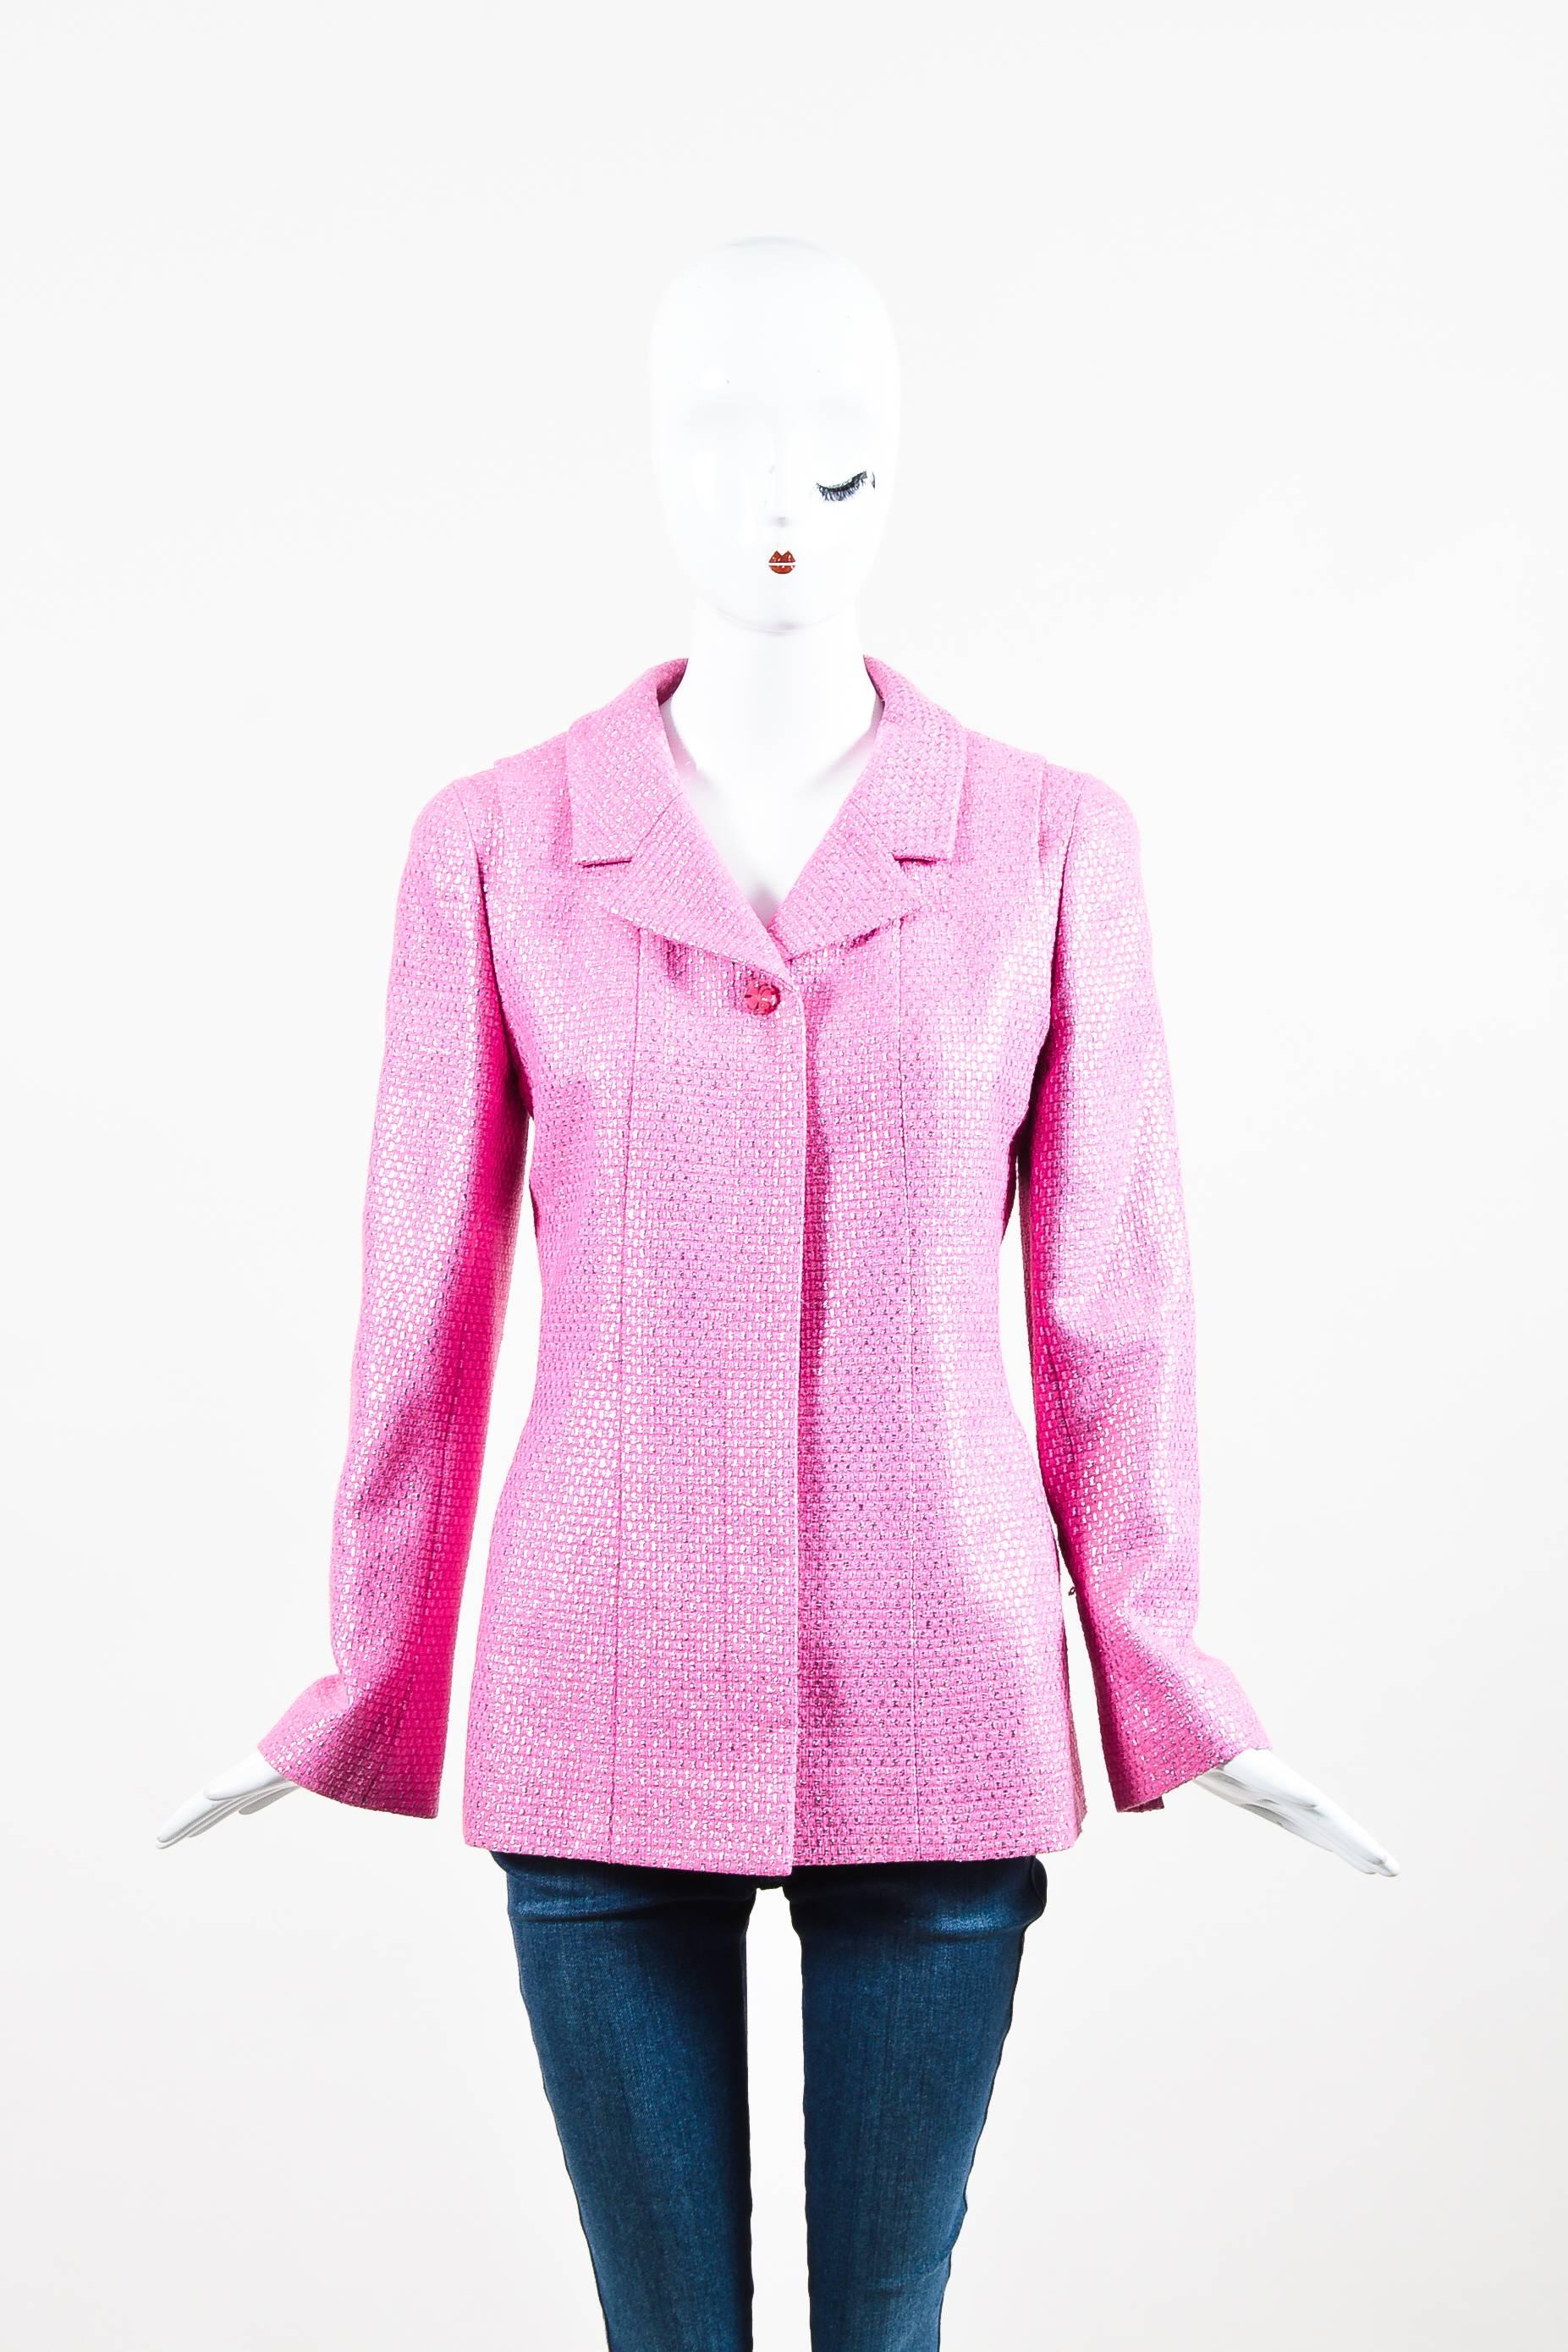 Bubblegum pink long sleeve buttoned jacket from Chanel features metallic square woven details throughout. Hidden buttons down the front for closure. The first button is made of clear plastic with a printed four leaf clover. This button is the only